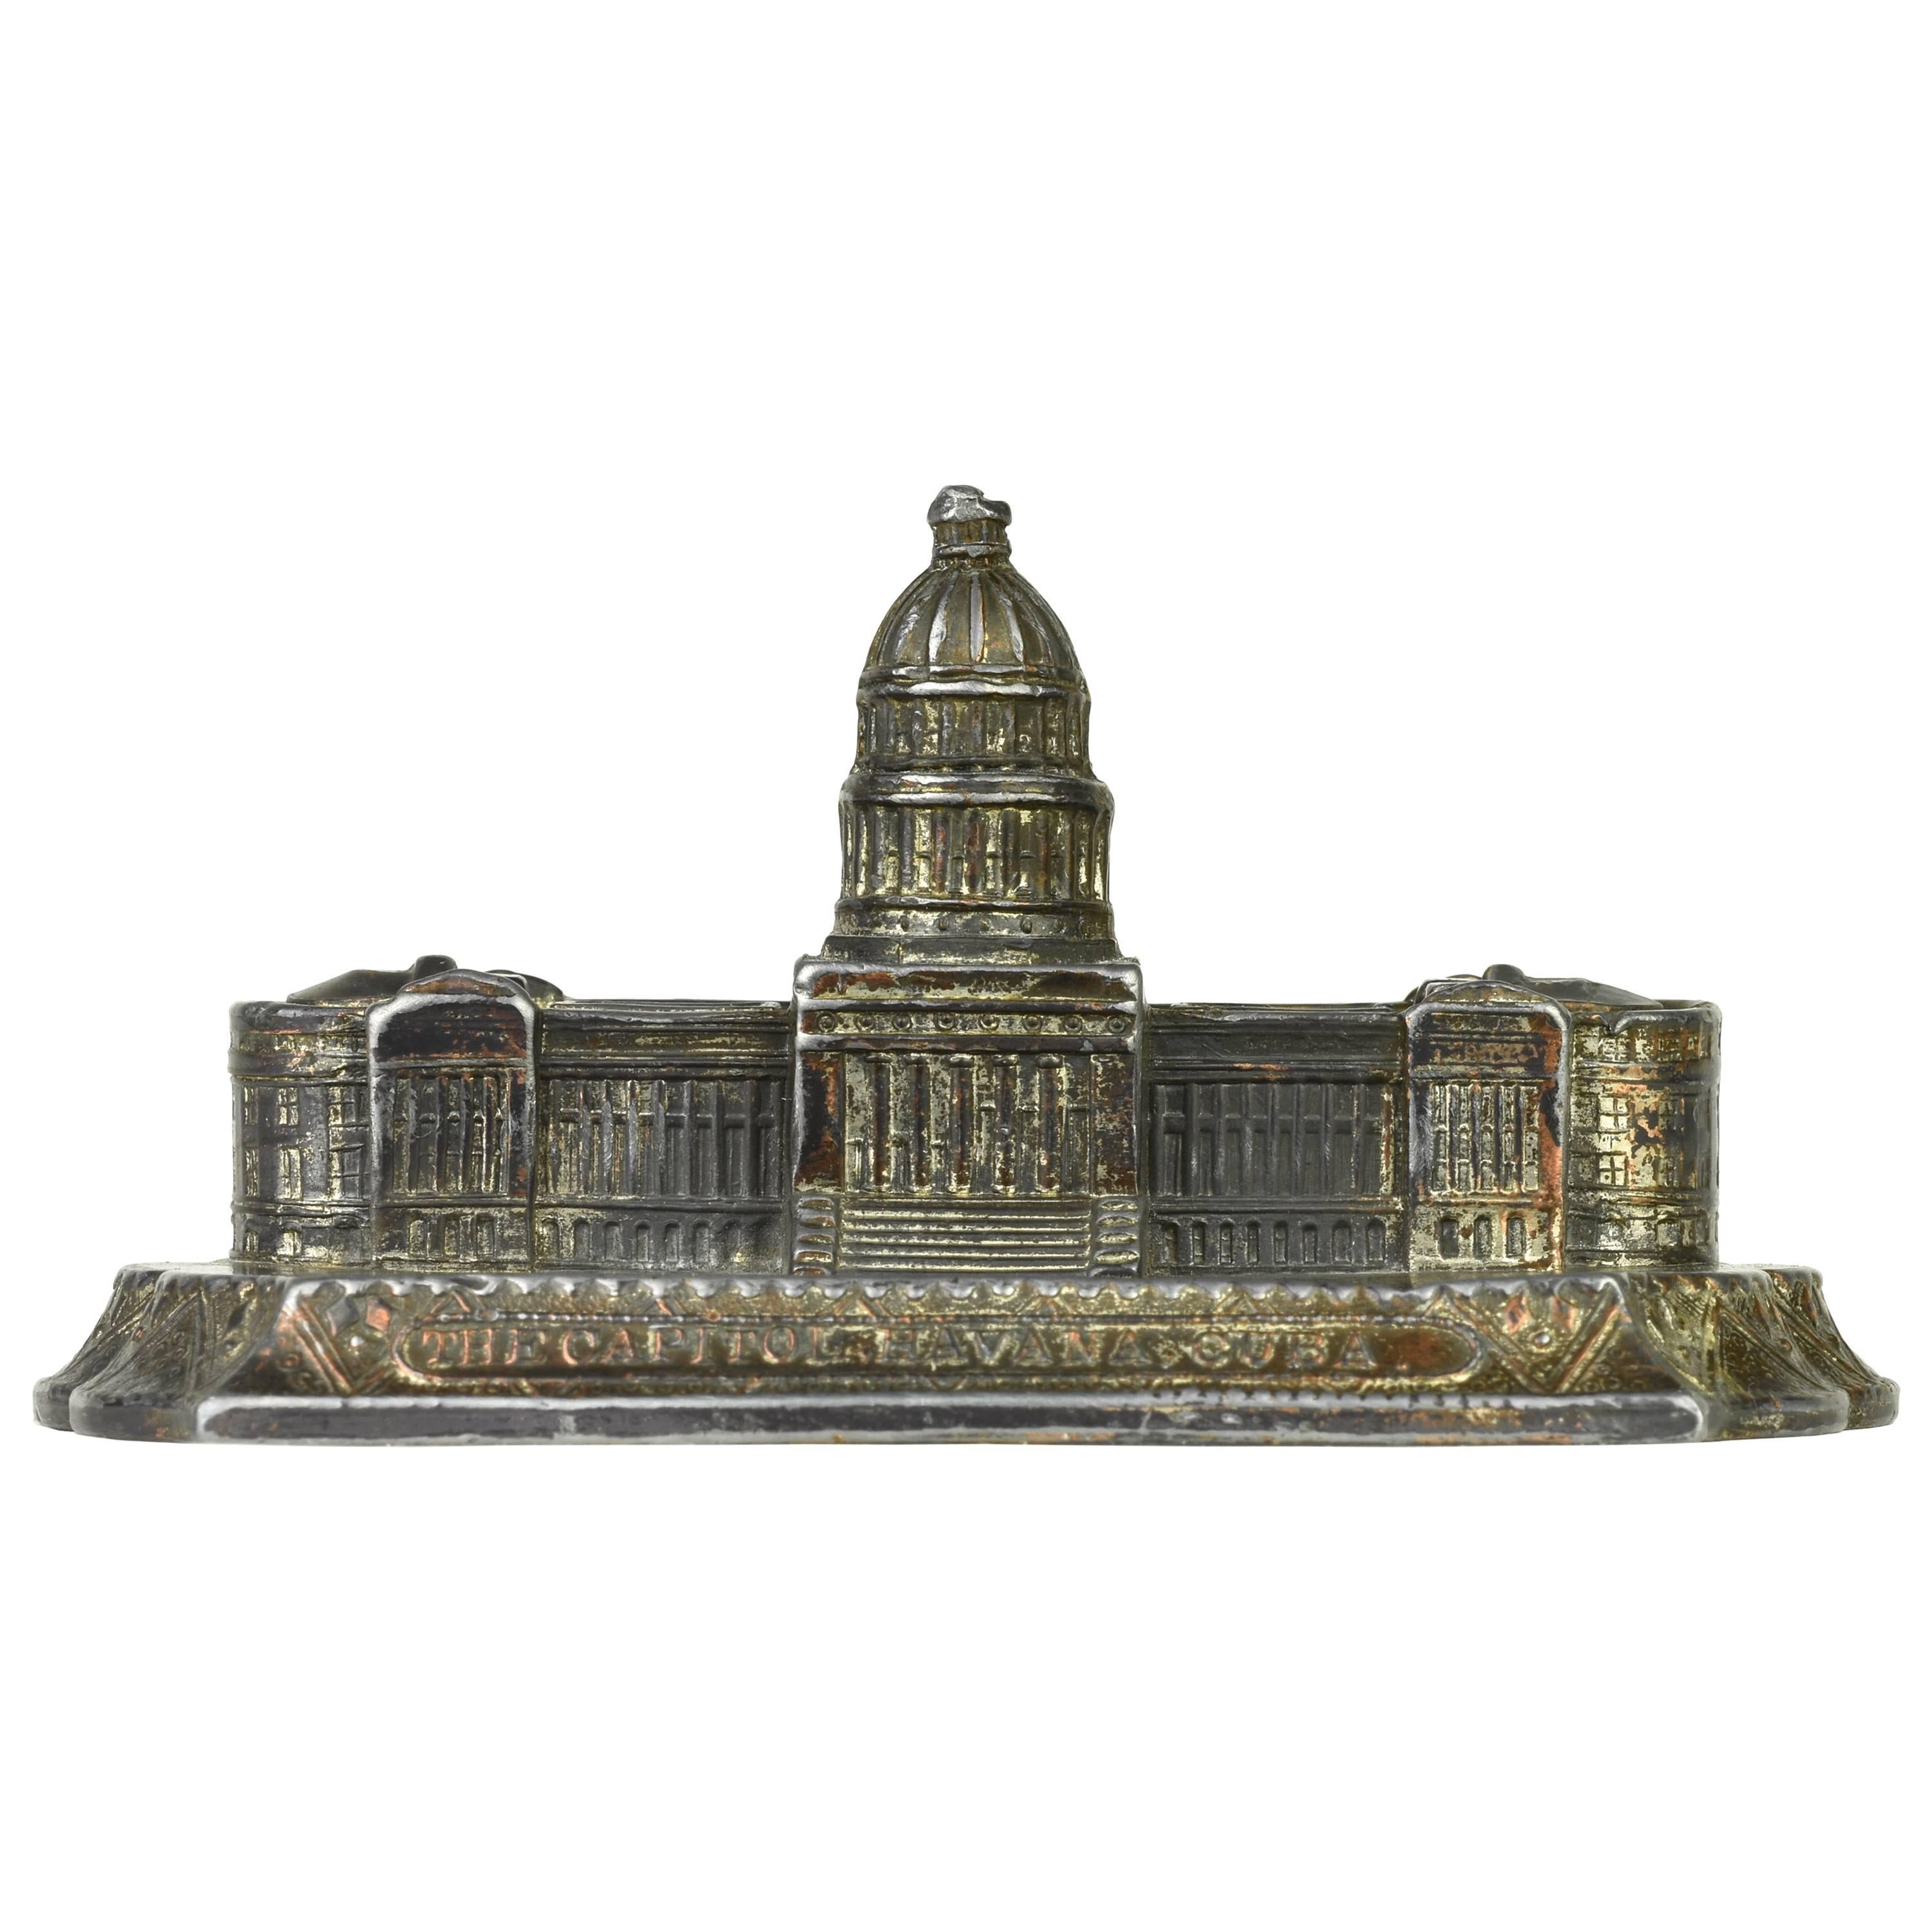 Havana Capitol Building, 1930s architectural souvenir model.

From Piraneseum's Attic, a 1930s, silver-plated lead replica of the Capitol in Havana, Cuba. 

Patterned after the Capitol Building in Washington, DC and built in 1926, the building